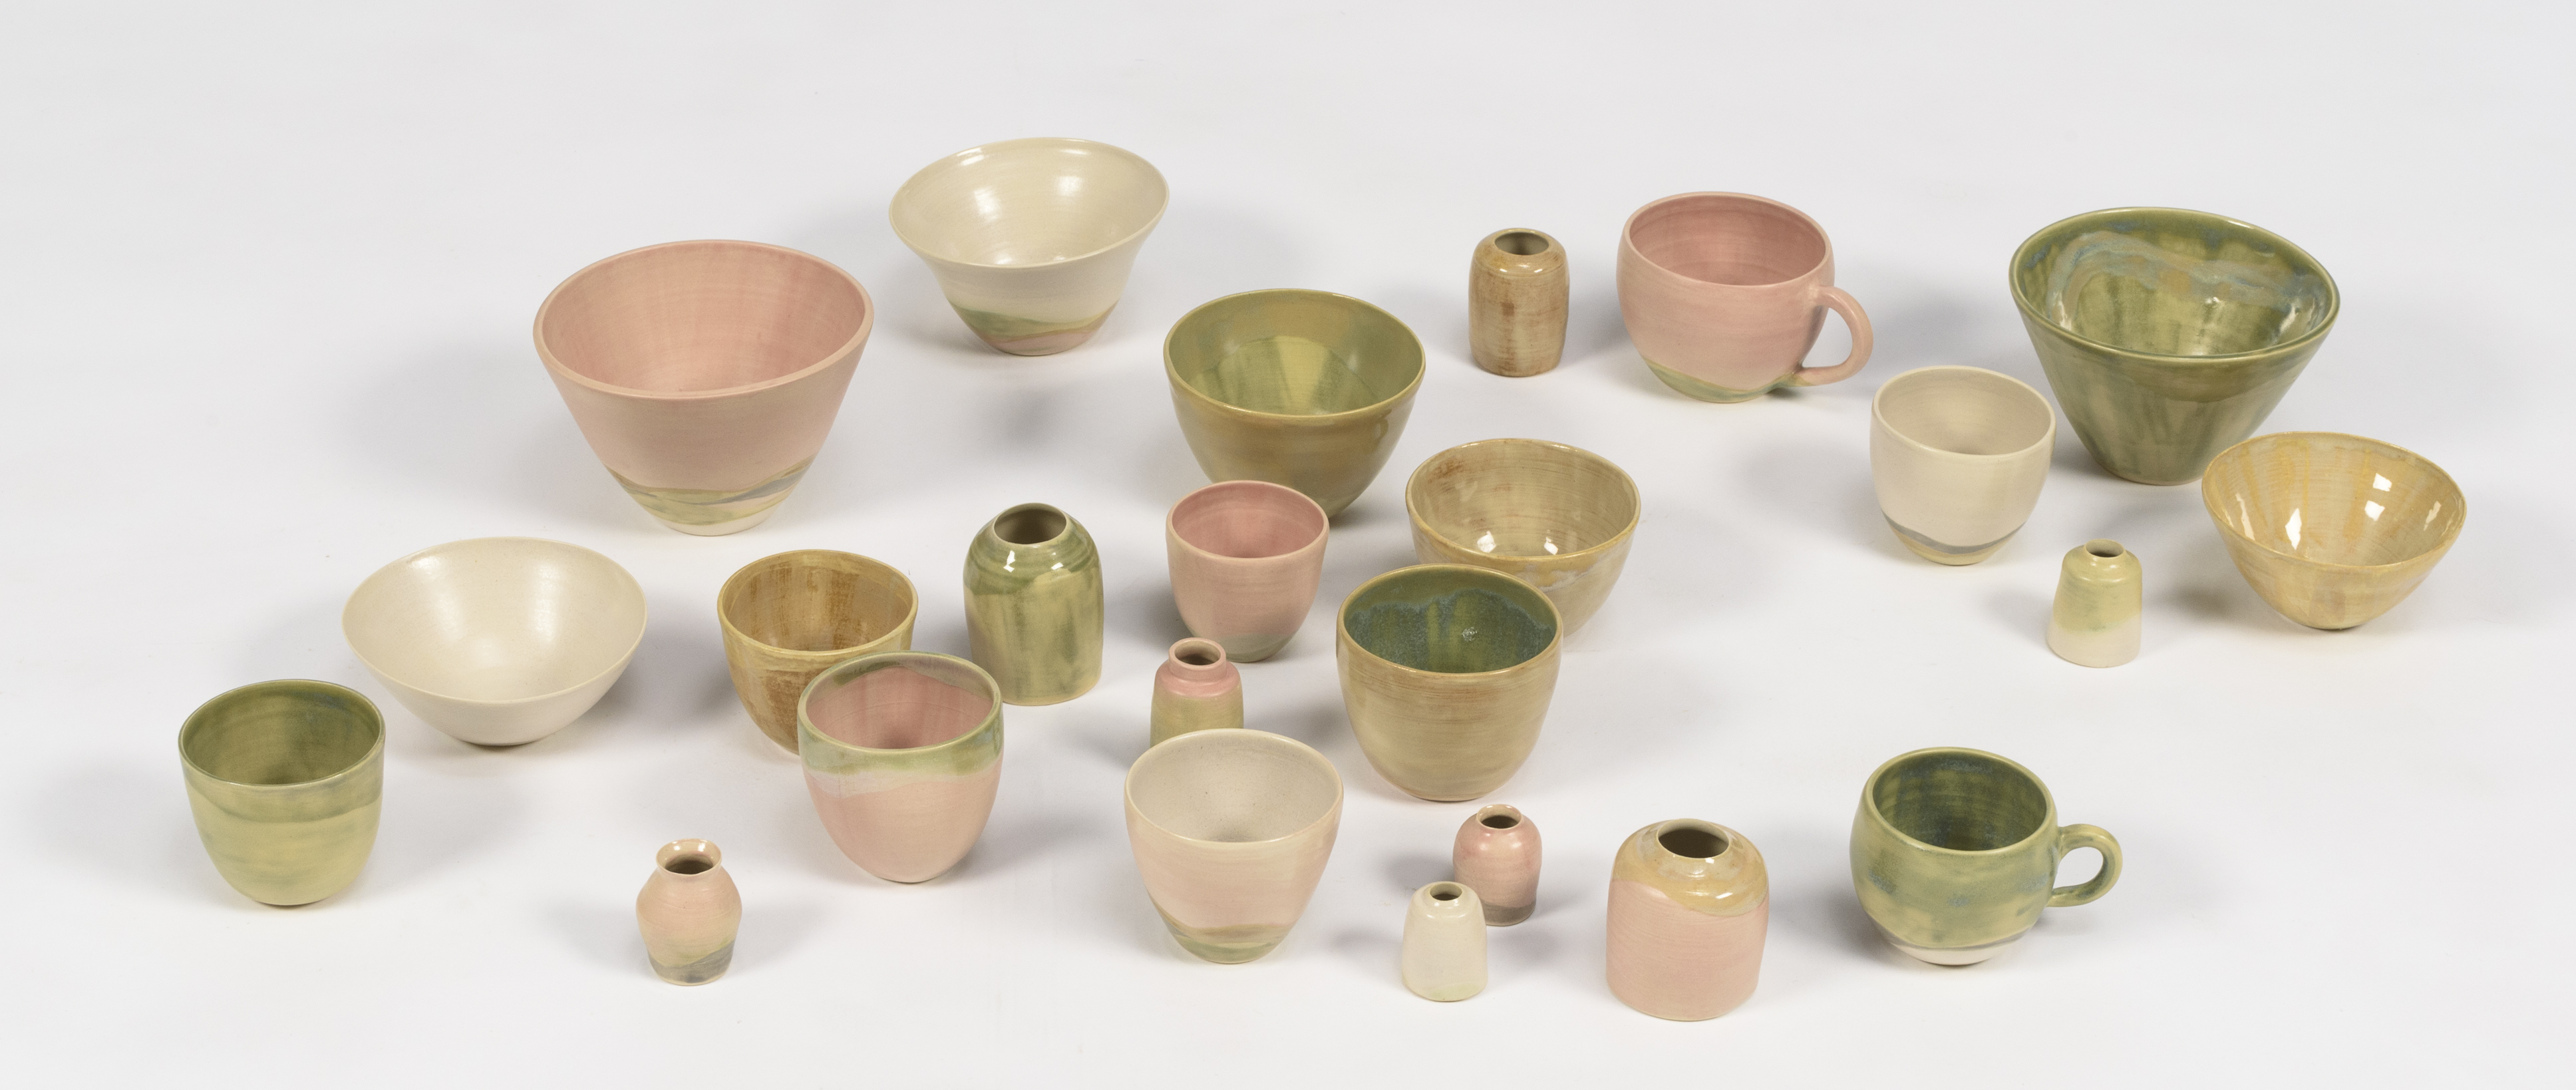 24 ceramic vessels of various shapes and sizes in glazes of shades of pink, green and white.